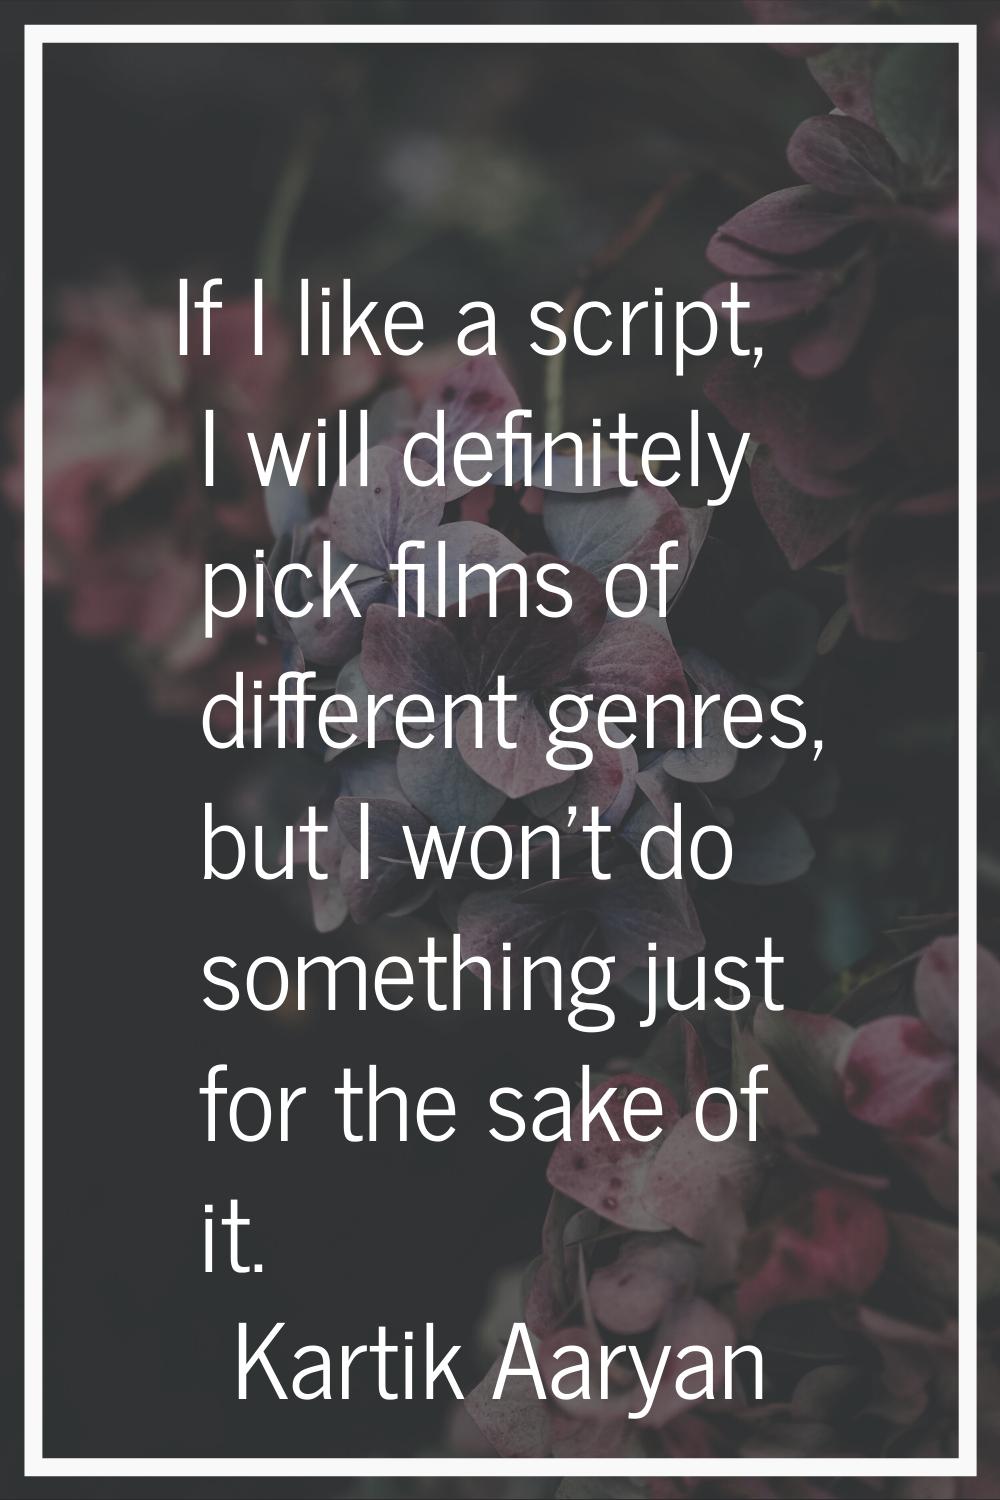 If I like a script, I will definitely pick films of different genres, but I won't do something just